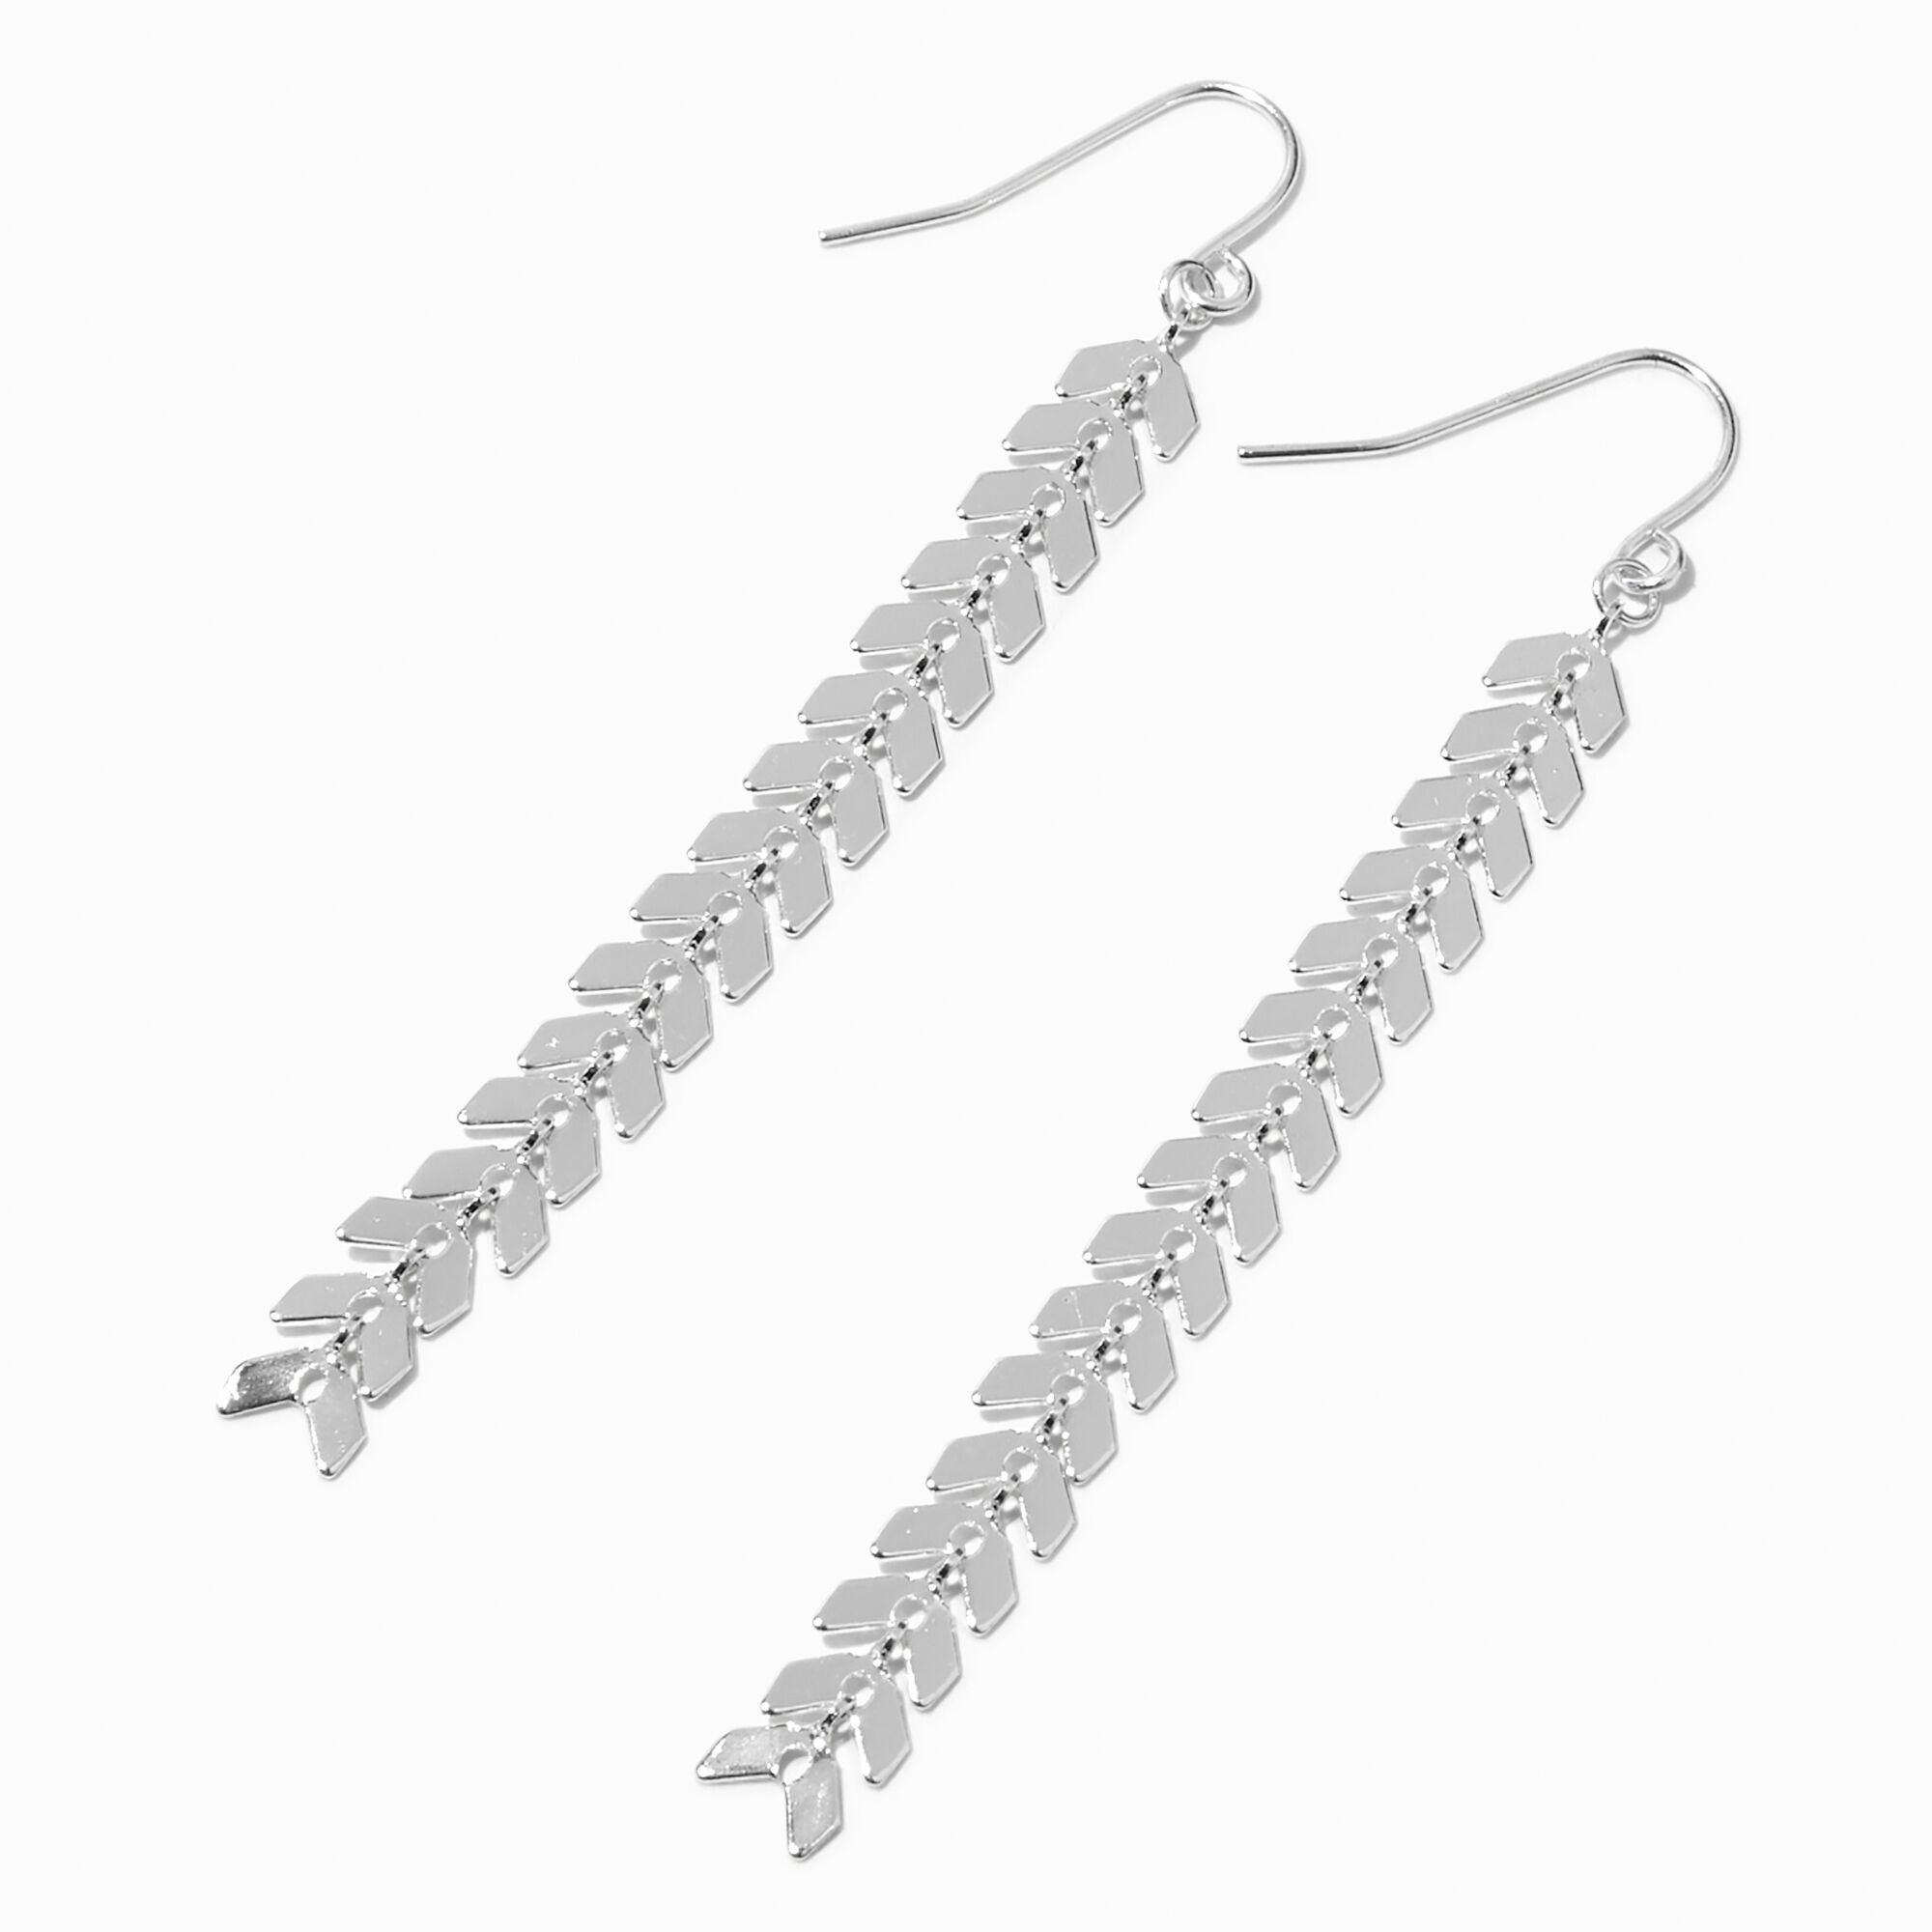 View Claires Tone Crystal Vine 2 Drop Earrings Silver information